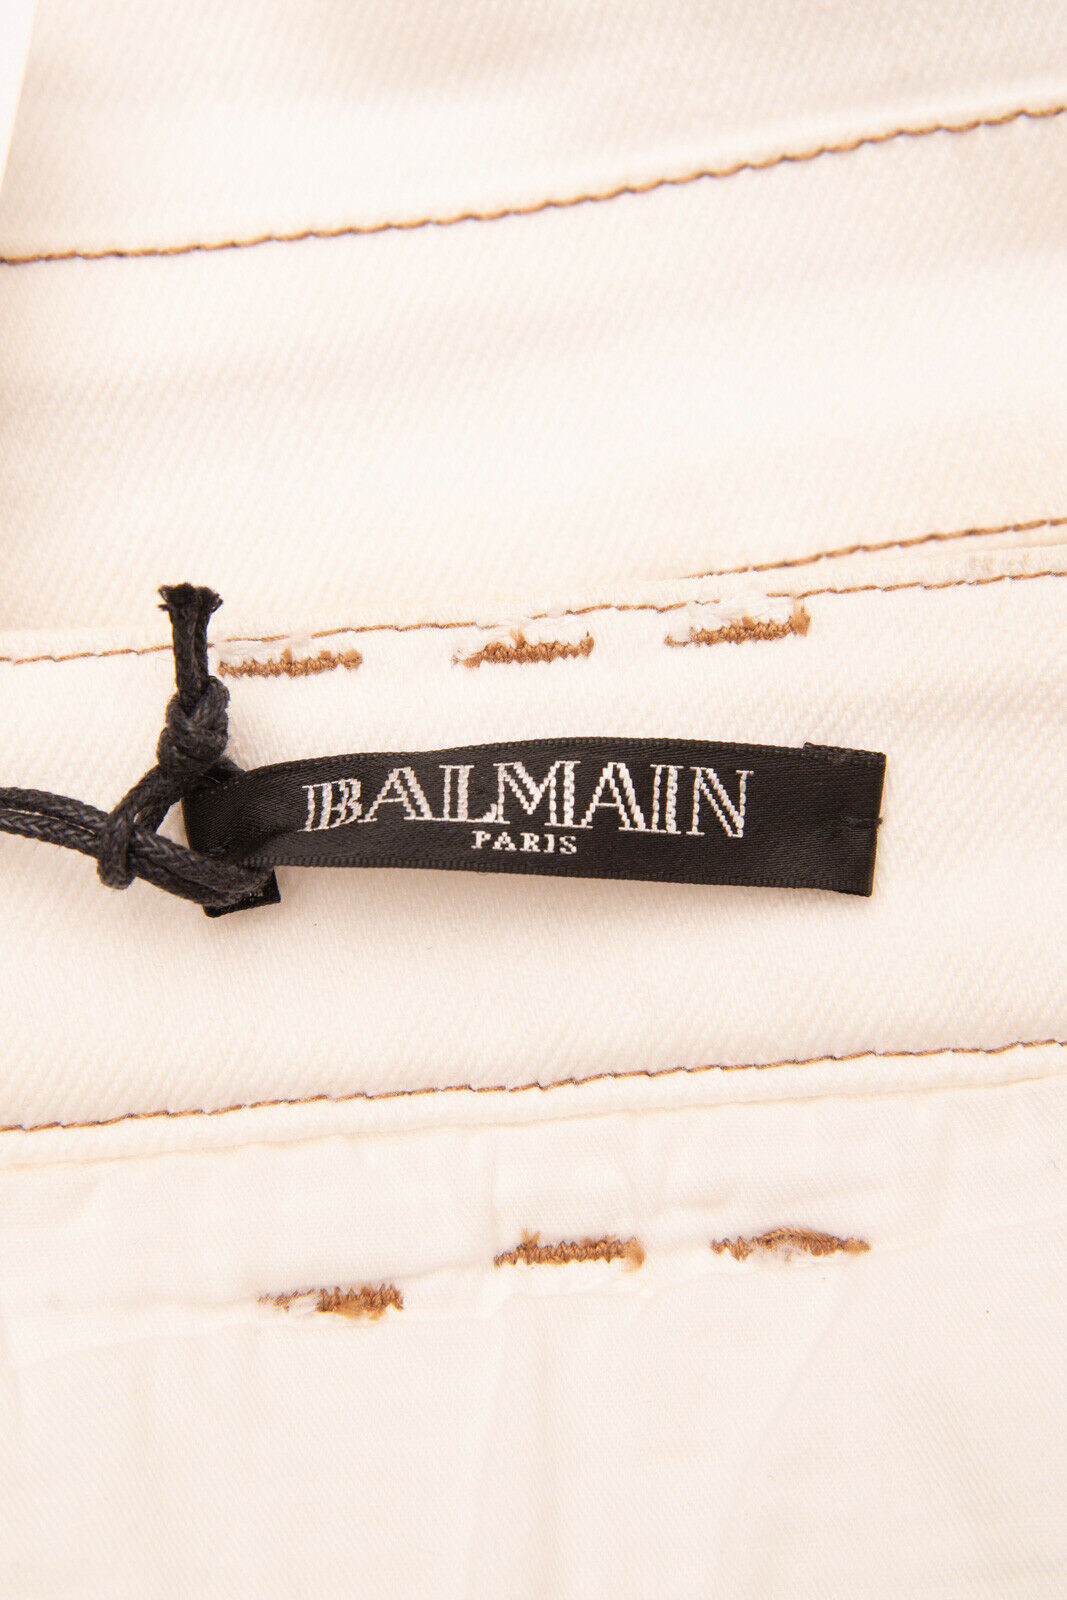 BALMAIN Jeans Size 38 Zipped Cuffs Made in Italy